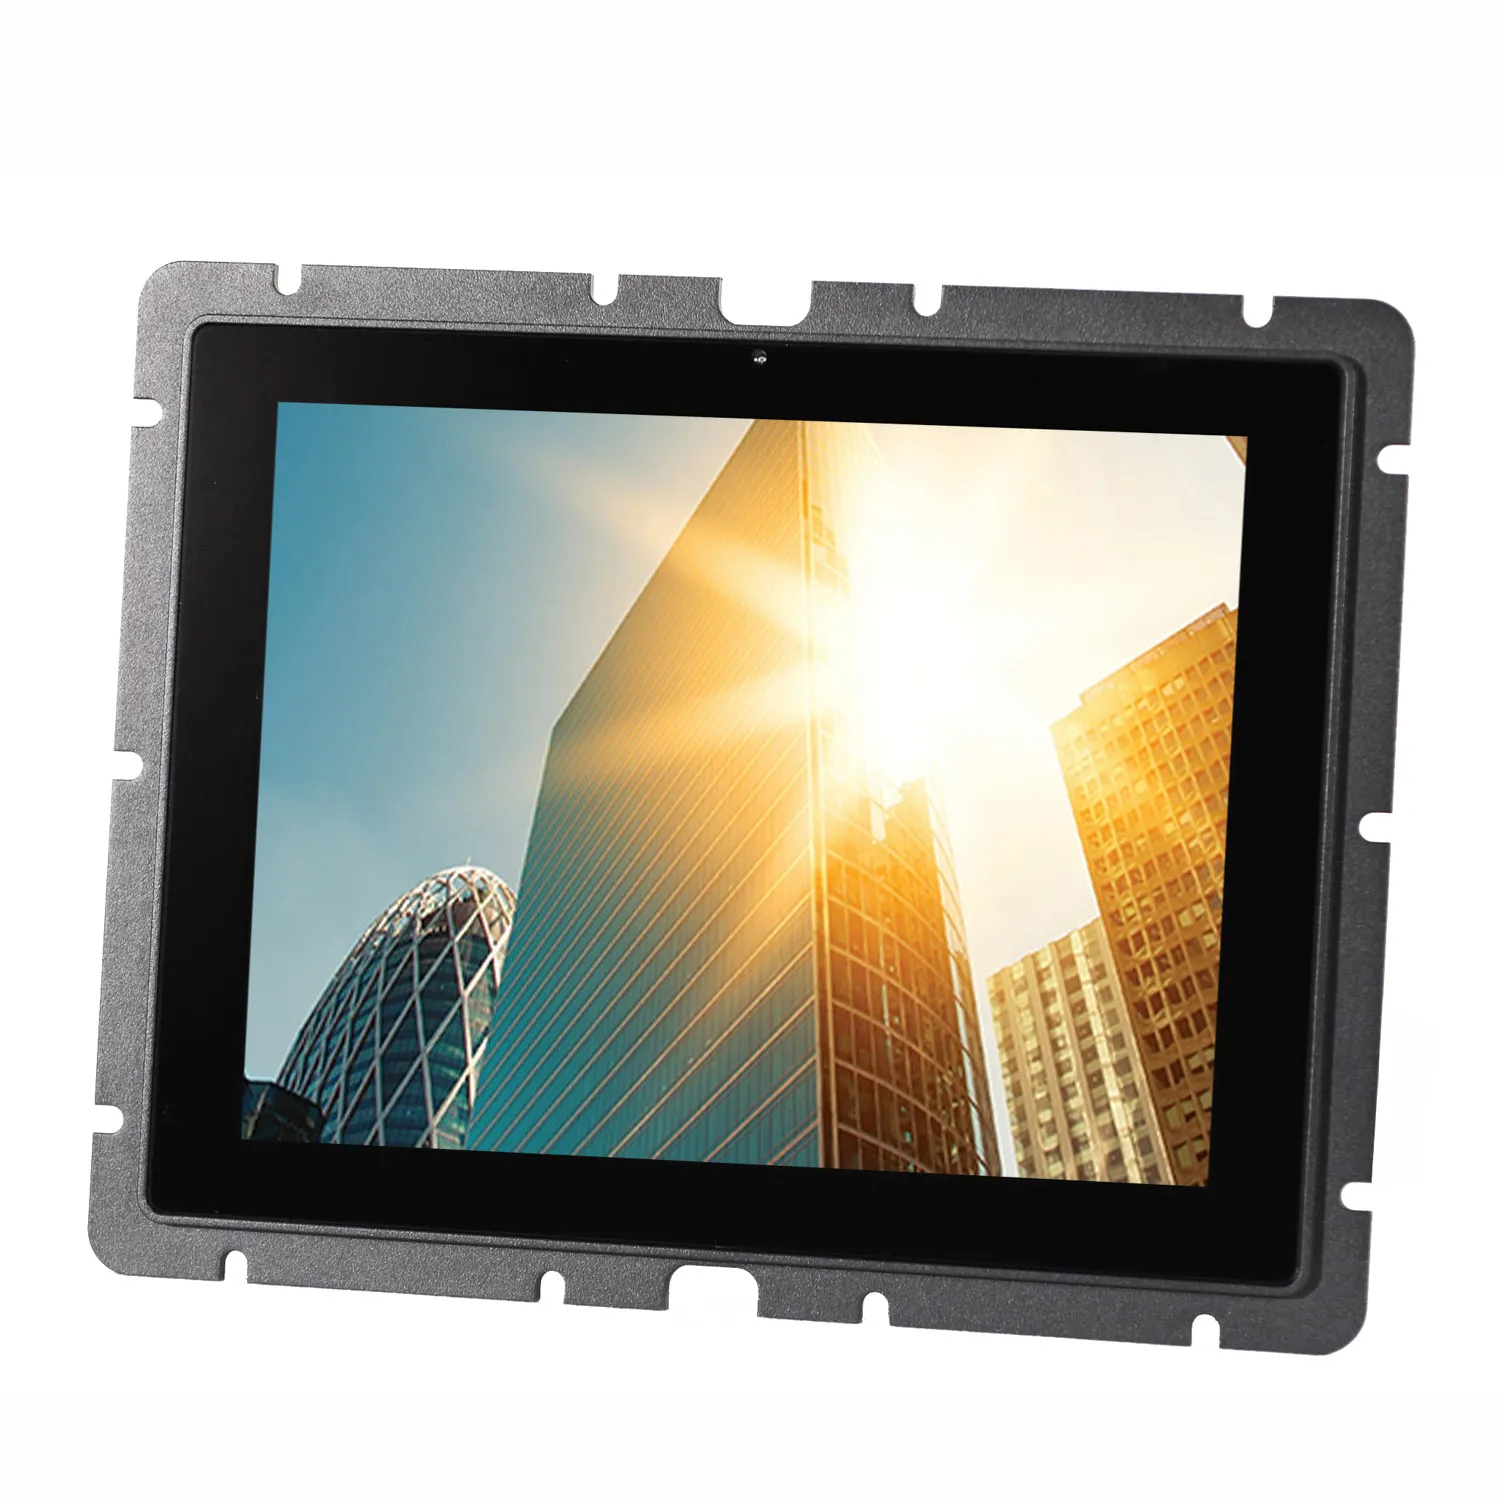 INDUSTRIAL OPEN FRAME HIGH BRIGHT TOUCH MONITOR KEETOUCH 10,4’’ KT-104-CHWS001